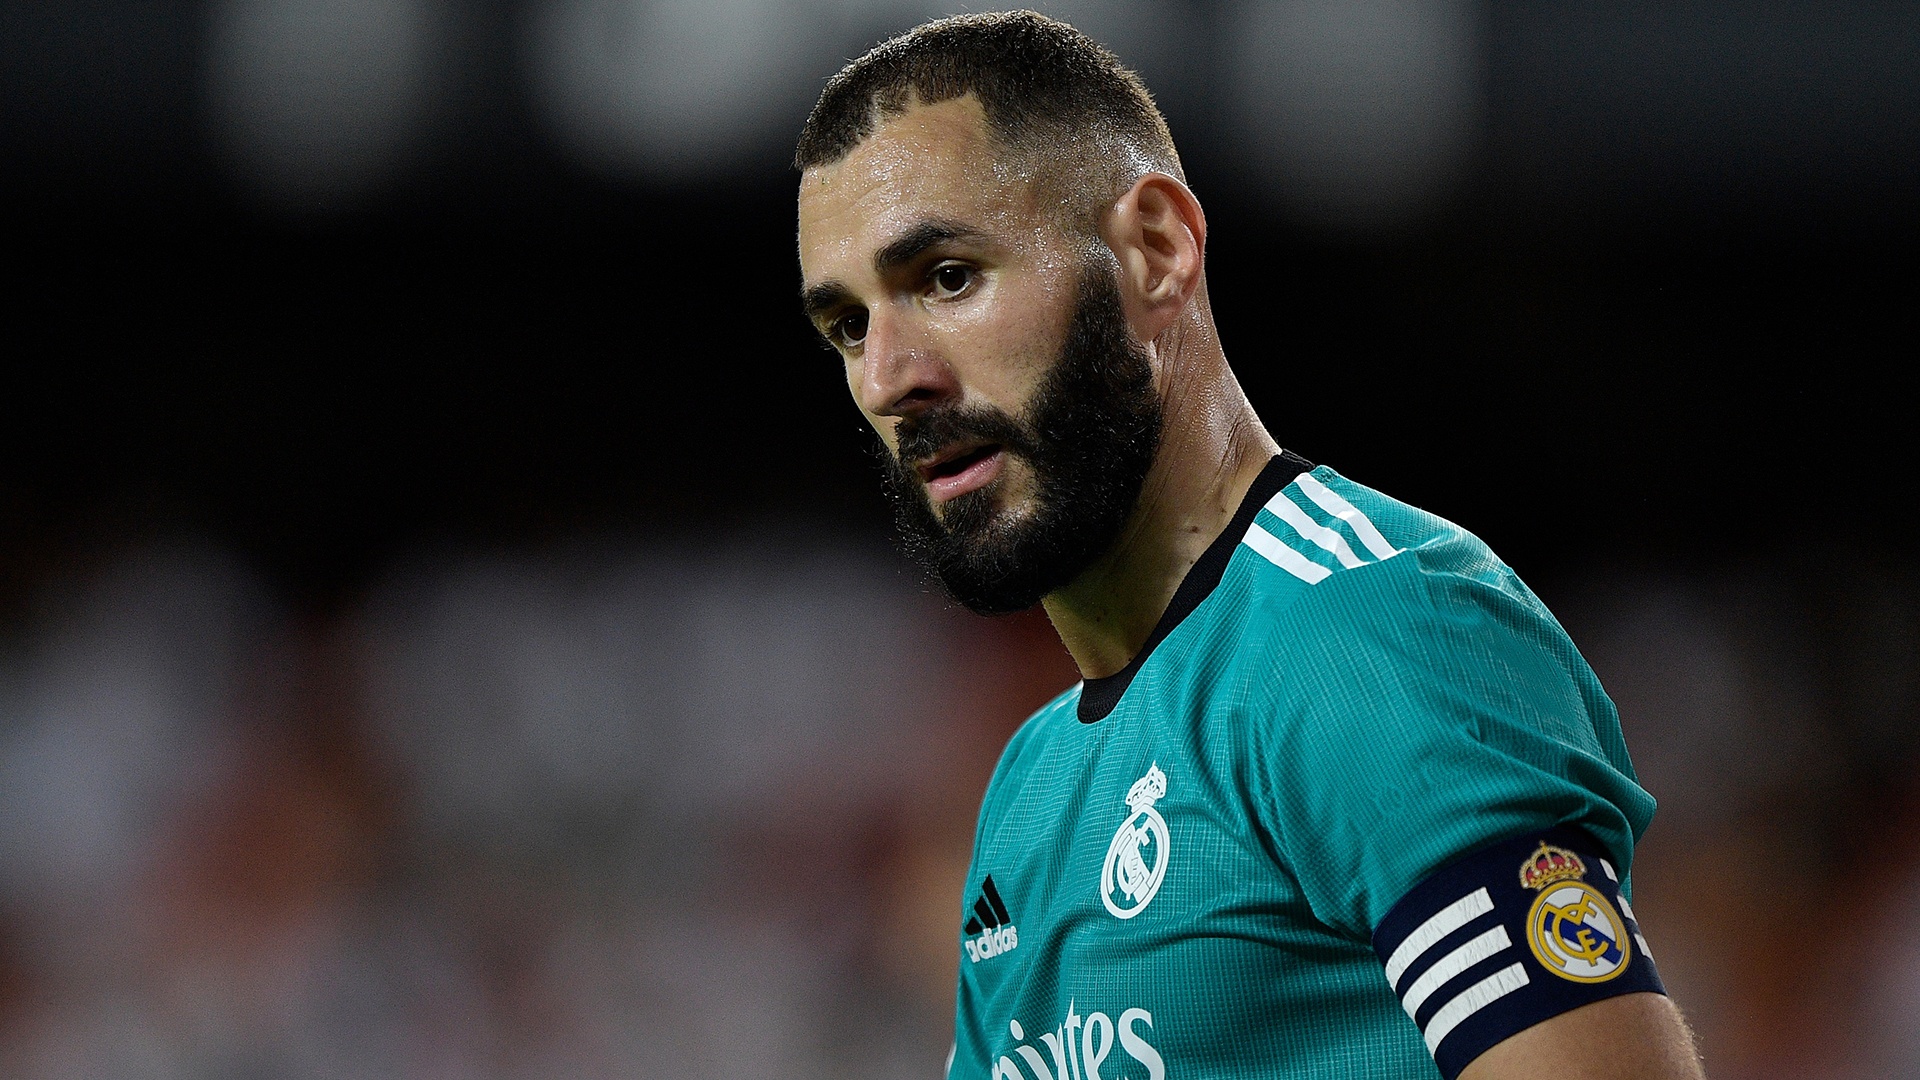 Real Madrid star Karim Benzema open to future MLS move: Football is getting better and better there